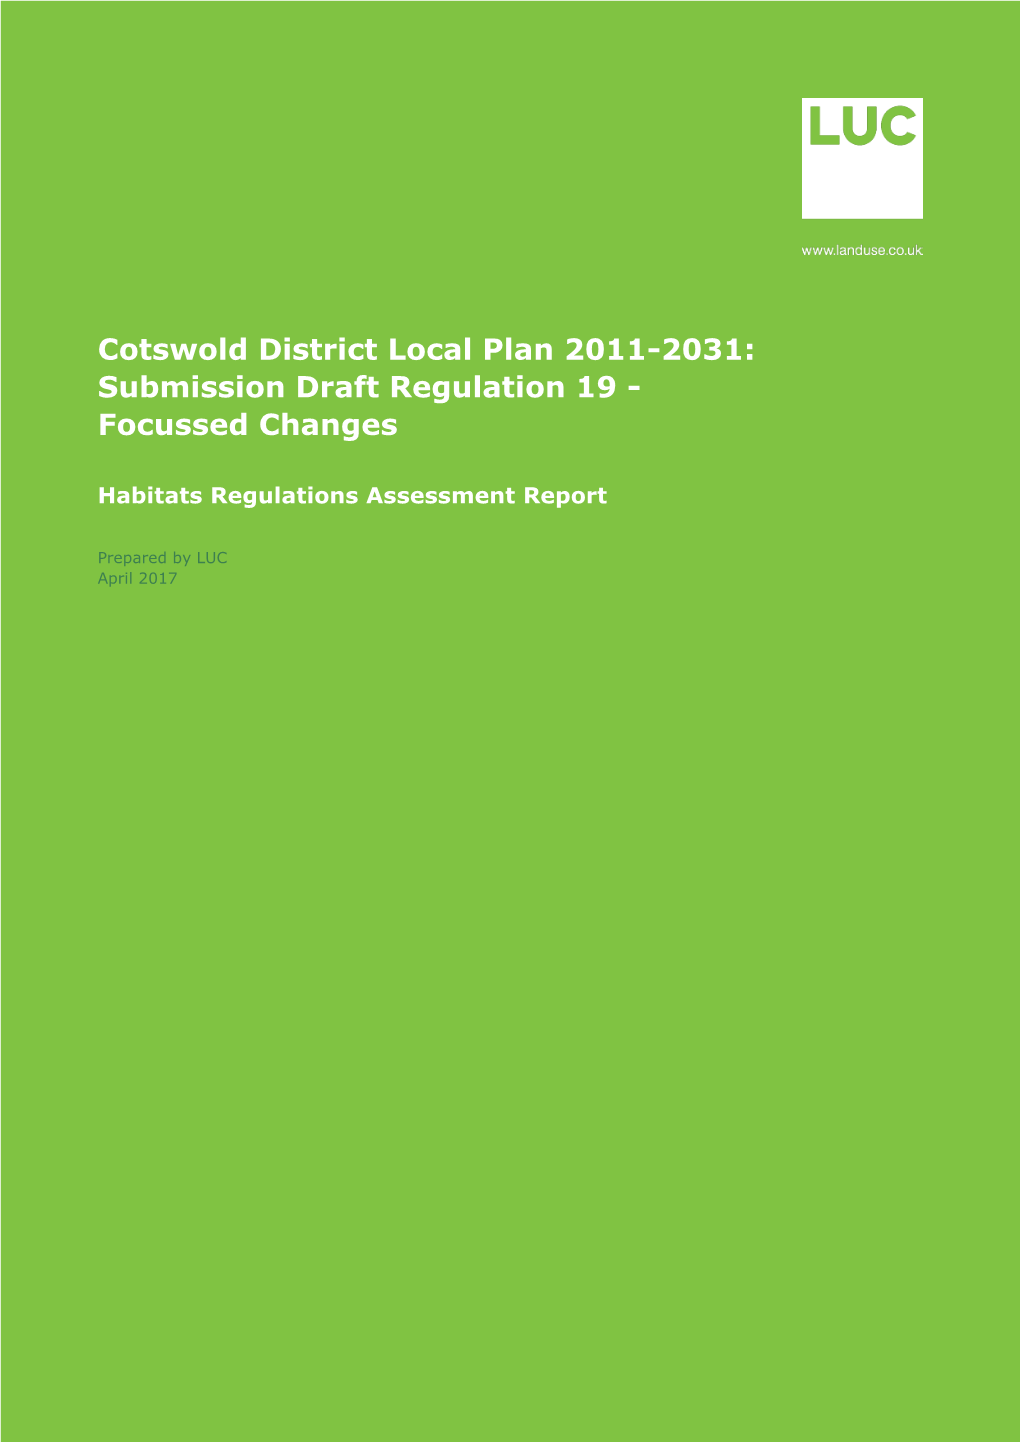 Cotswold District Local Plan 2011-2031: Submission Draft Regulation 19 - Focussed Changes